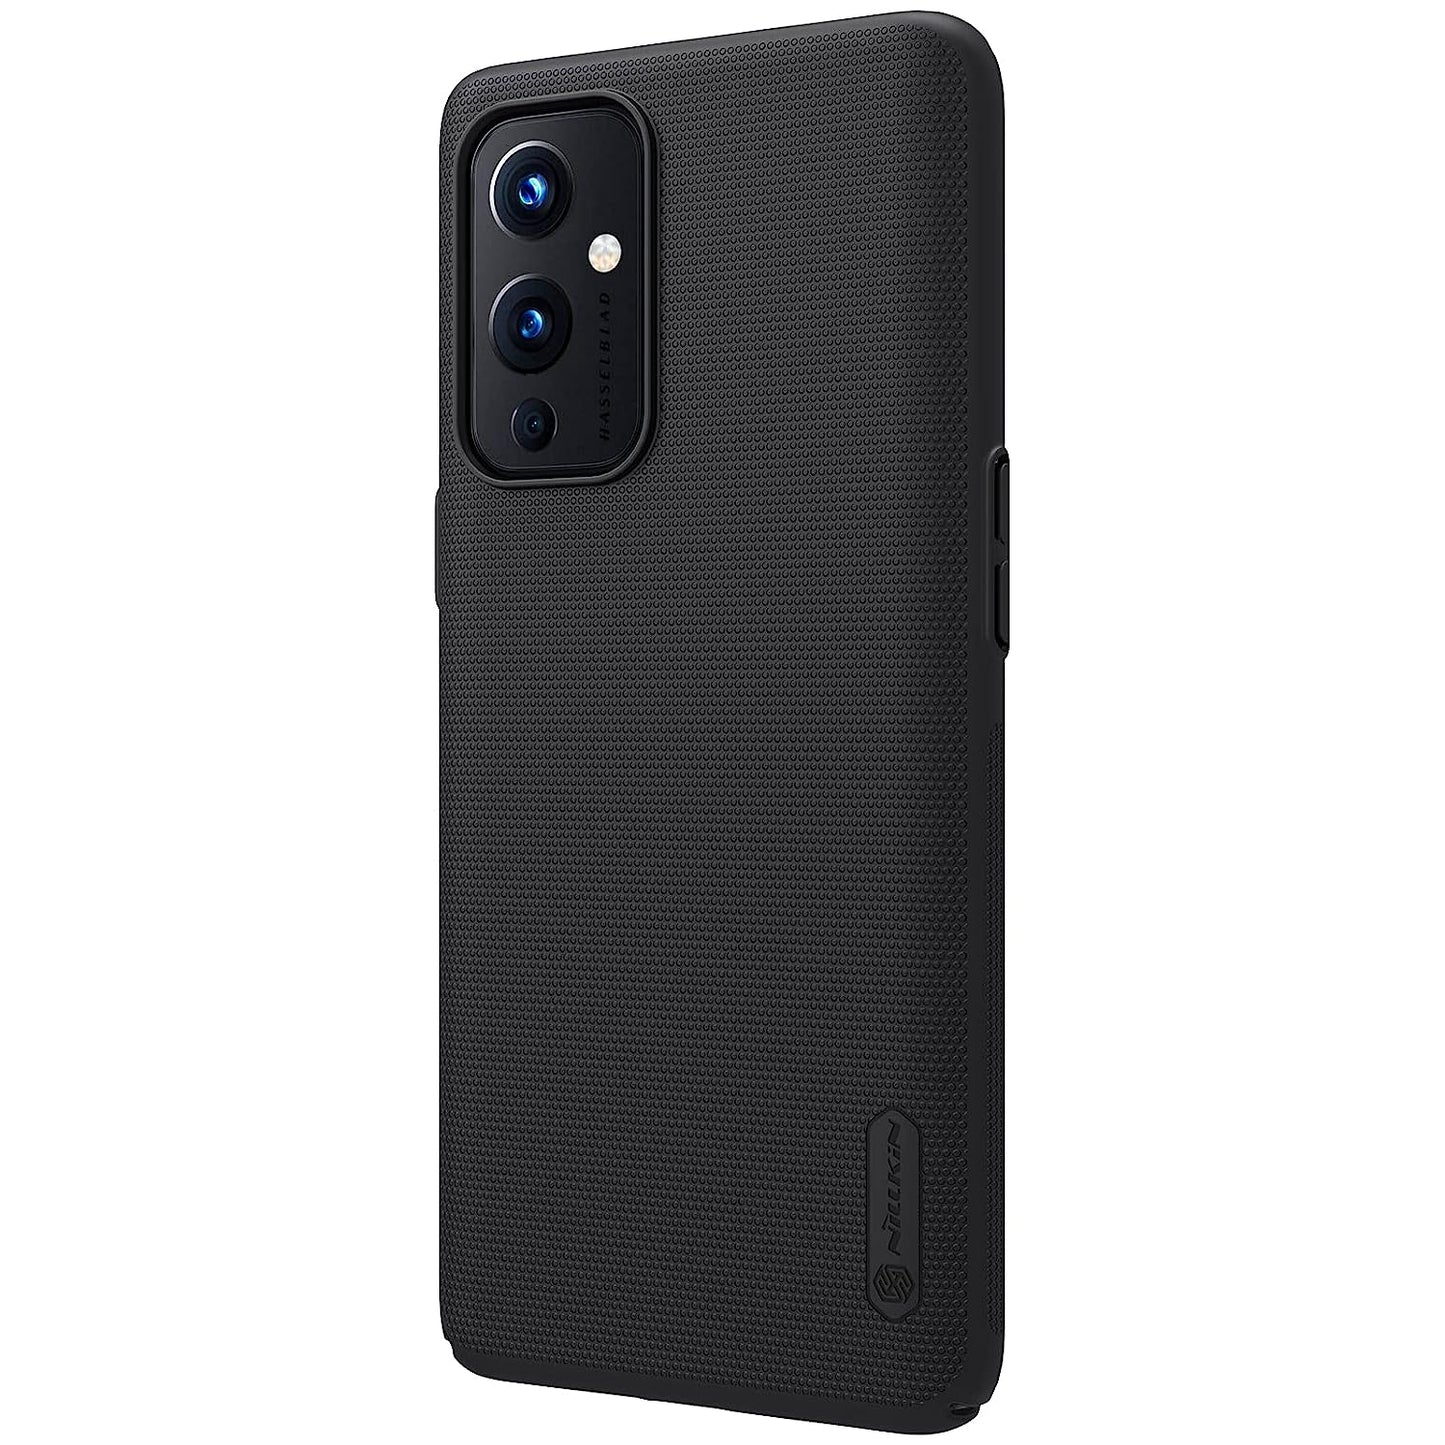 Nillkin Plastic Case For Oneplus 9 One Plus 9 (1+9) (6.55" Inch) Super Frosted Hard Back Cover Pc Black Color